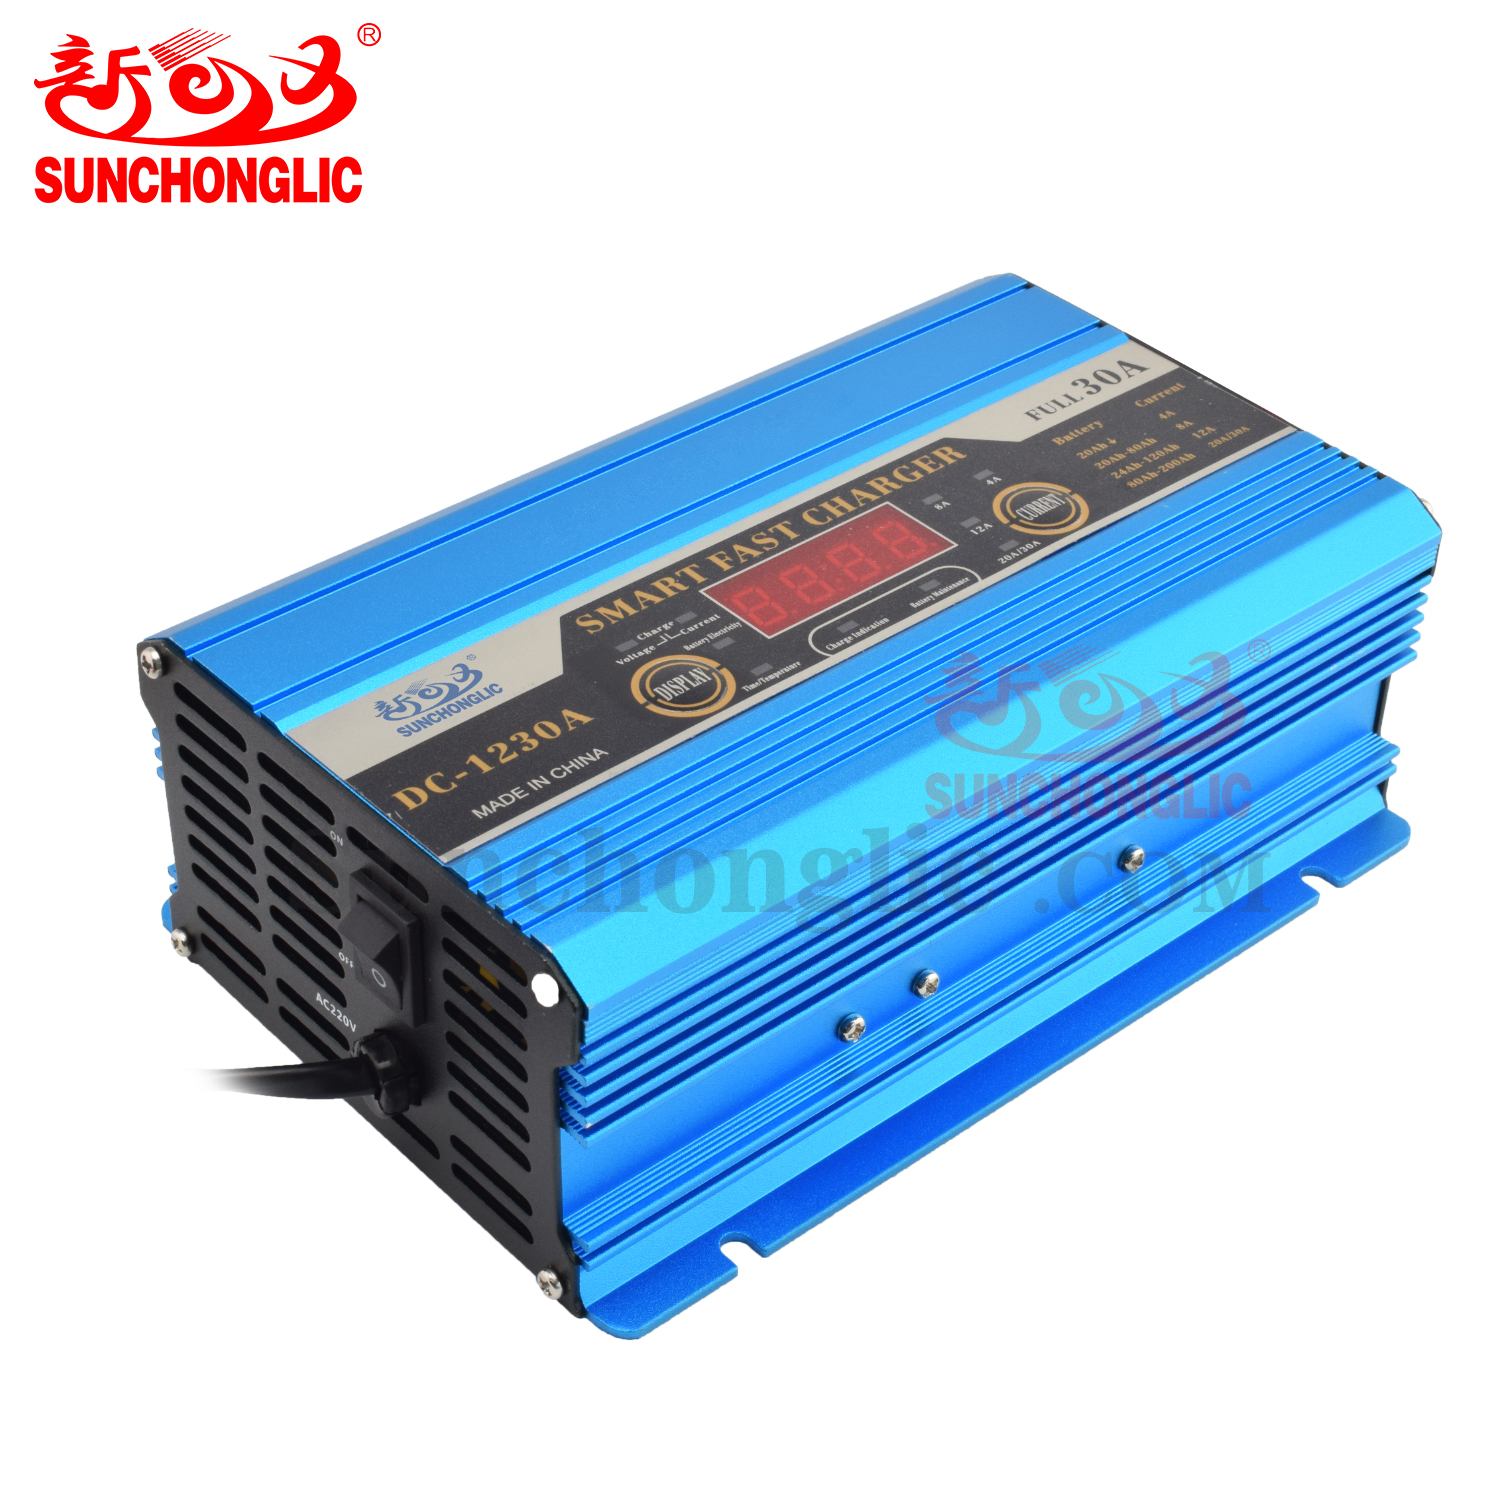 12V 30A battery charger for lead acid agm gel battery